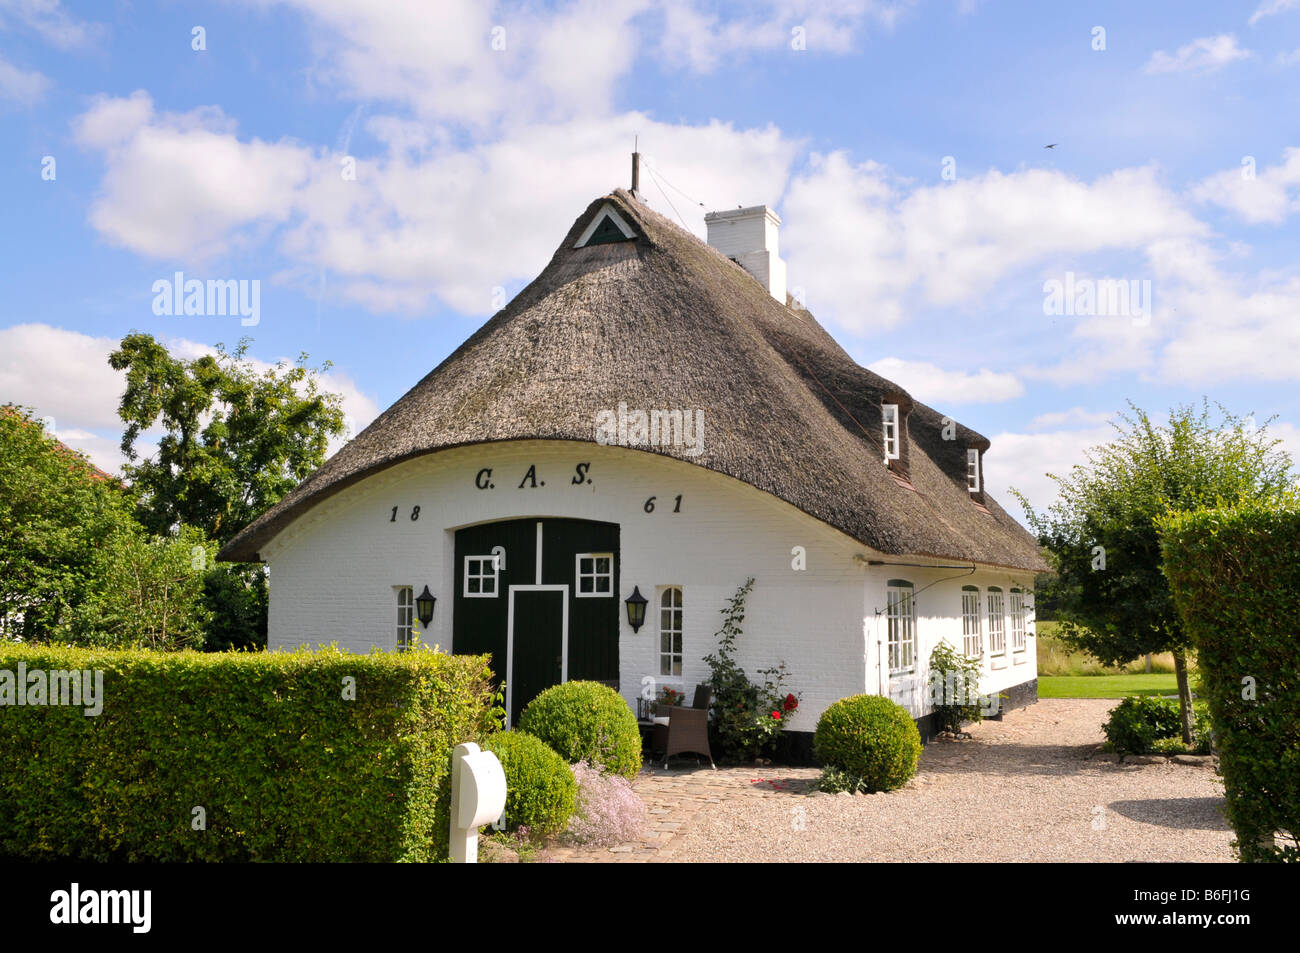 Thatched roof house in Sieseby, Schlei, Schleswig-Holstein, Germany, Europe Stock Photo